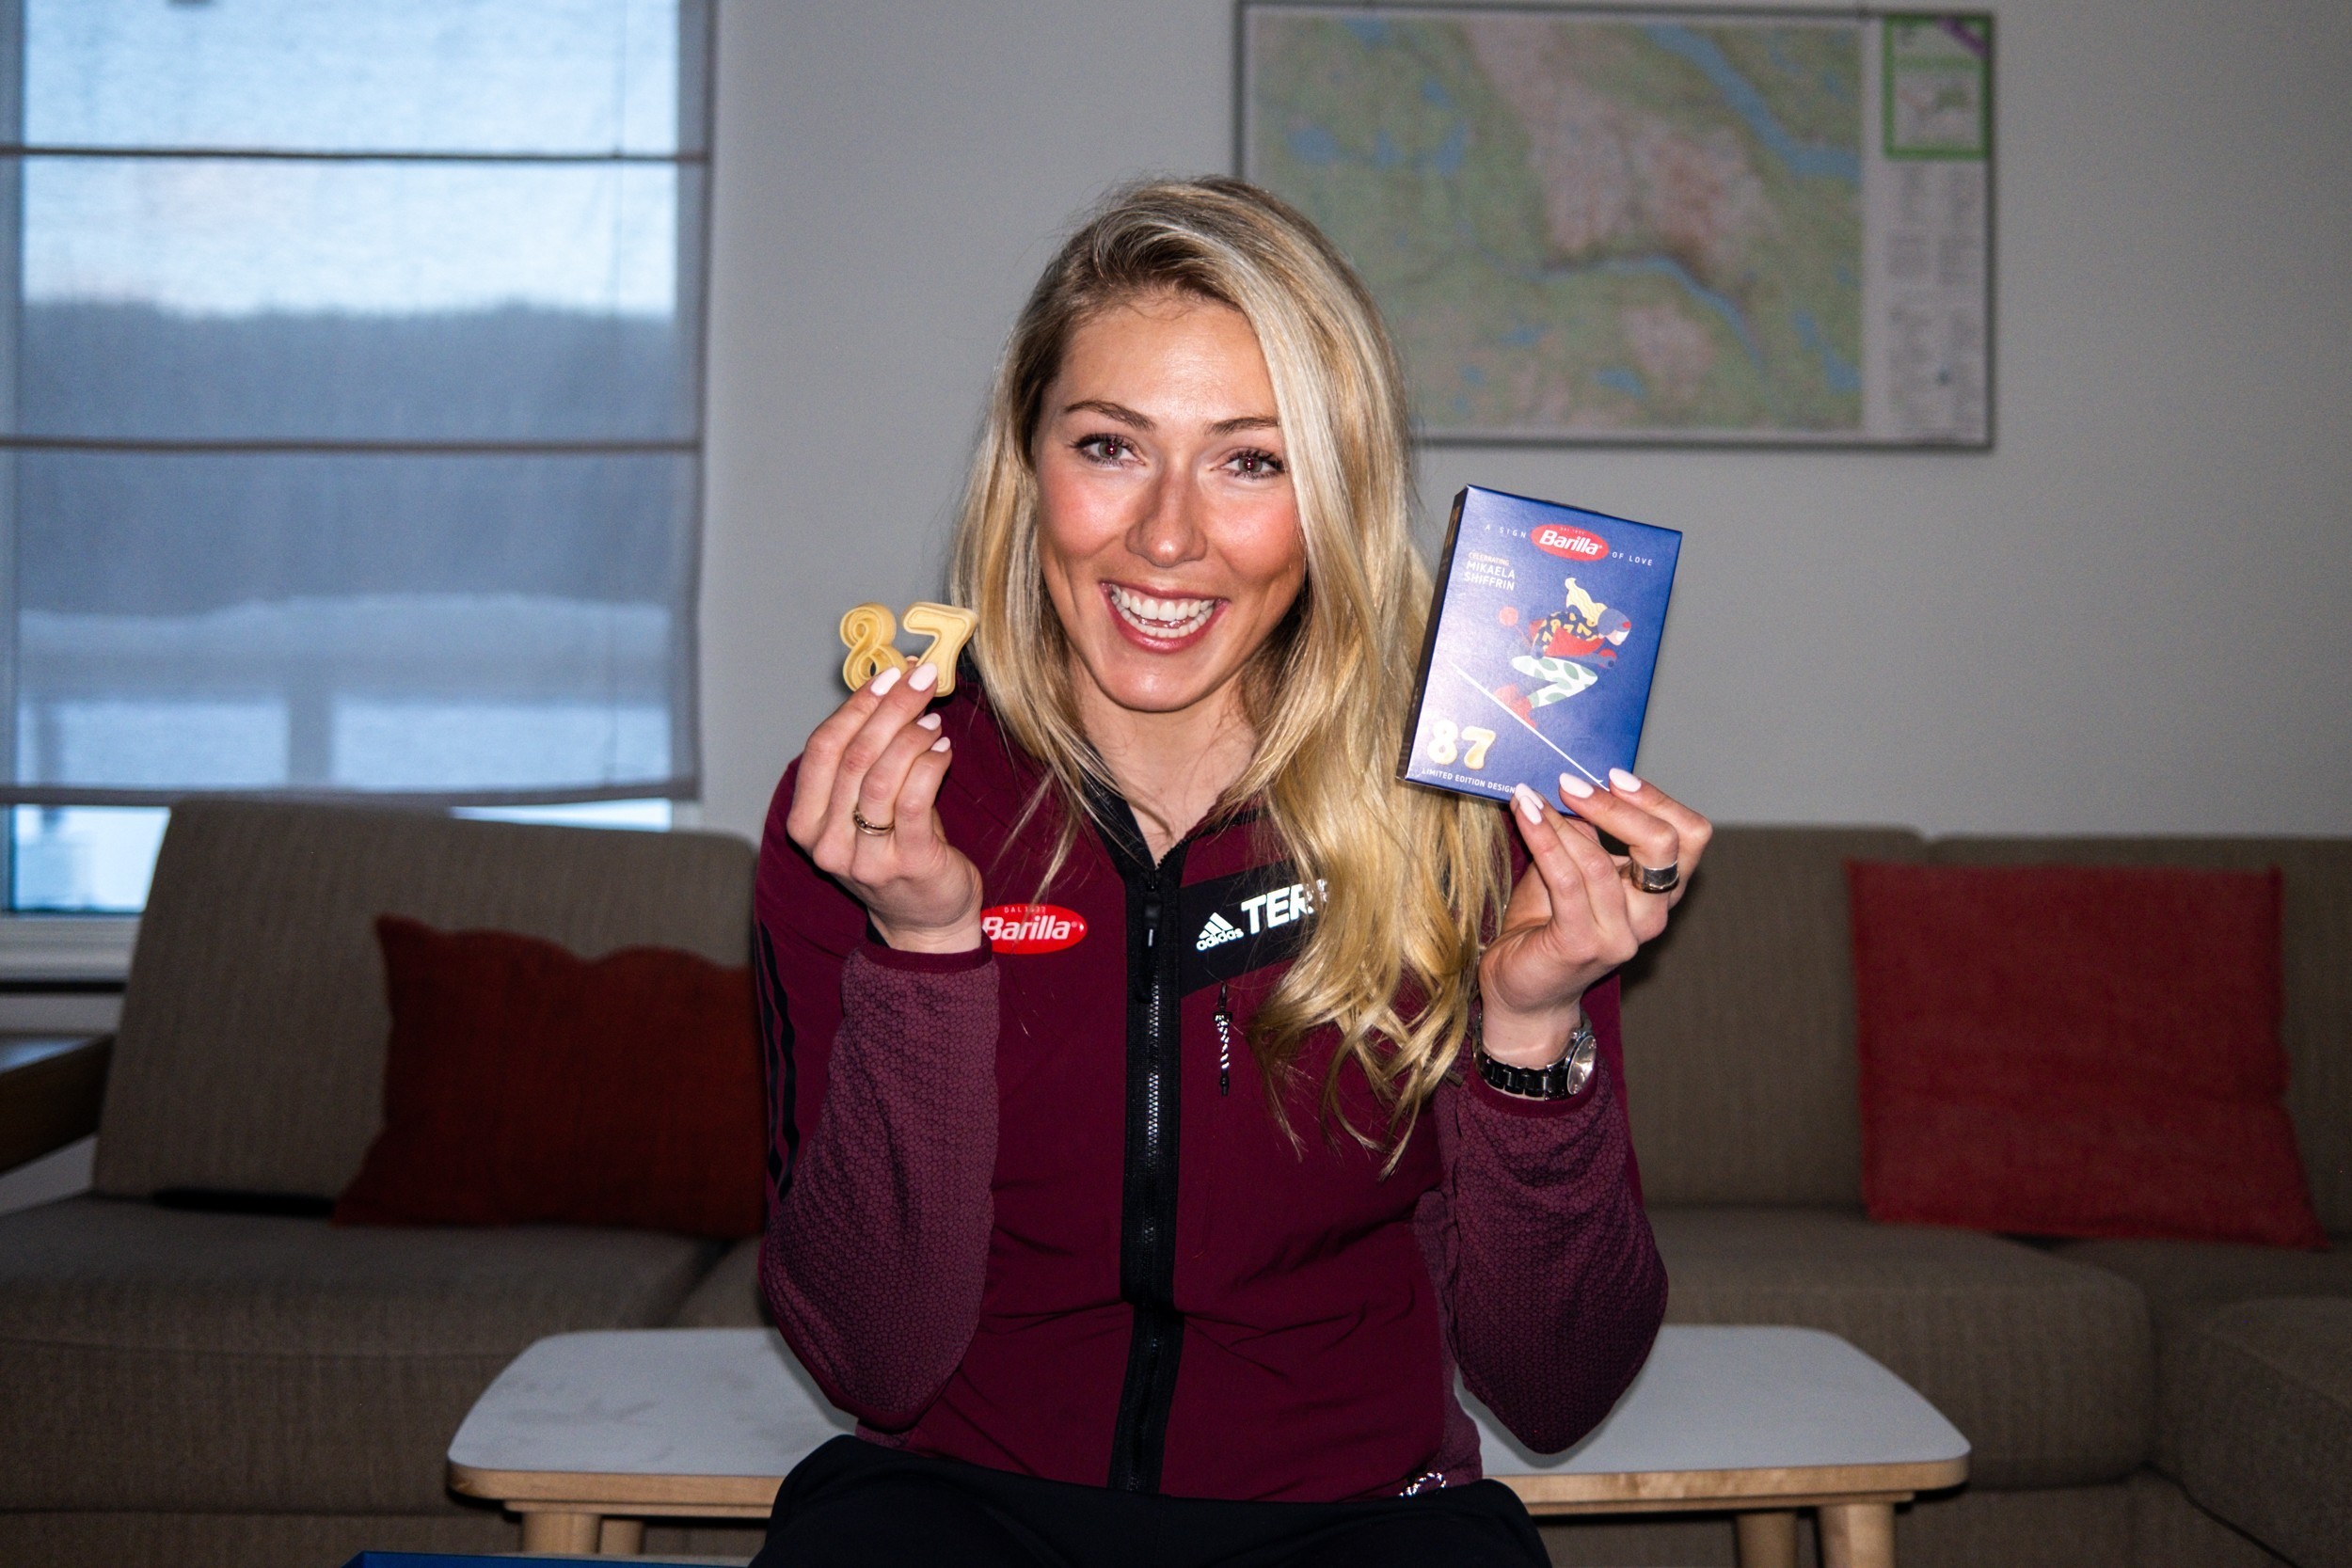 Barilla & Mikaela Shiffrin: Greatness starts with a great recipe - Pack No. 27